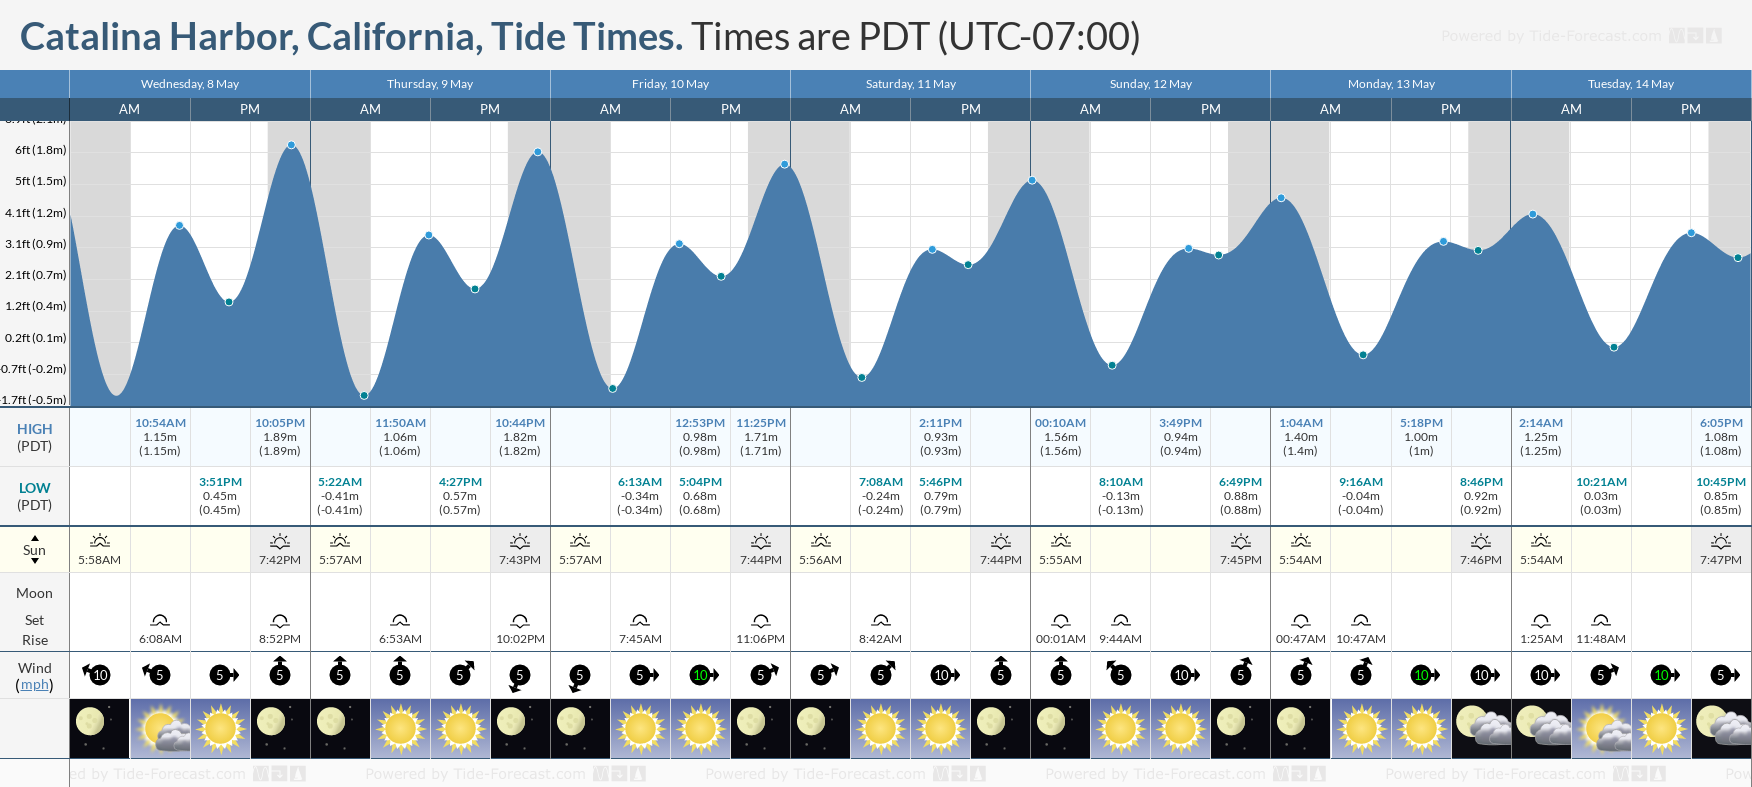 Catalina Harbor, California Tide Chart including high and low tide tide times for the next 7 days